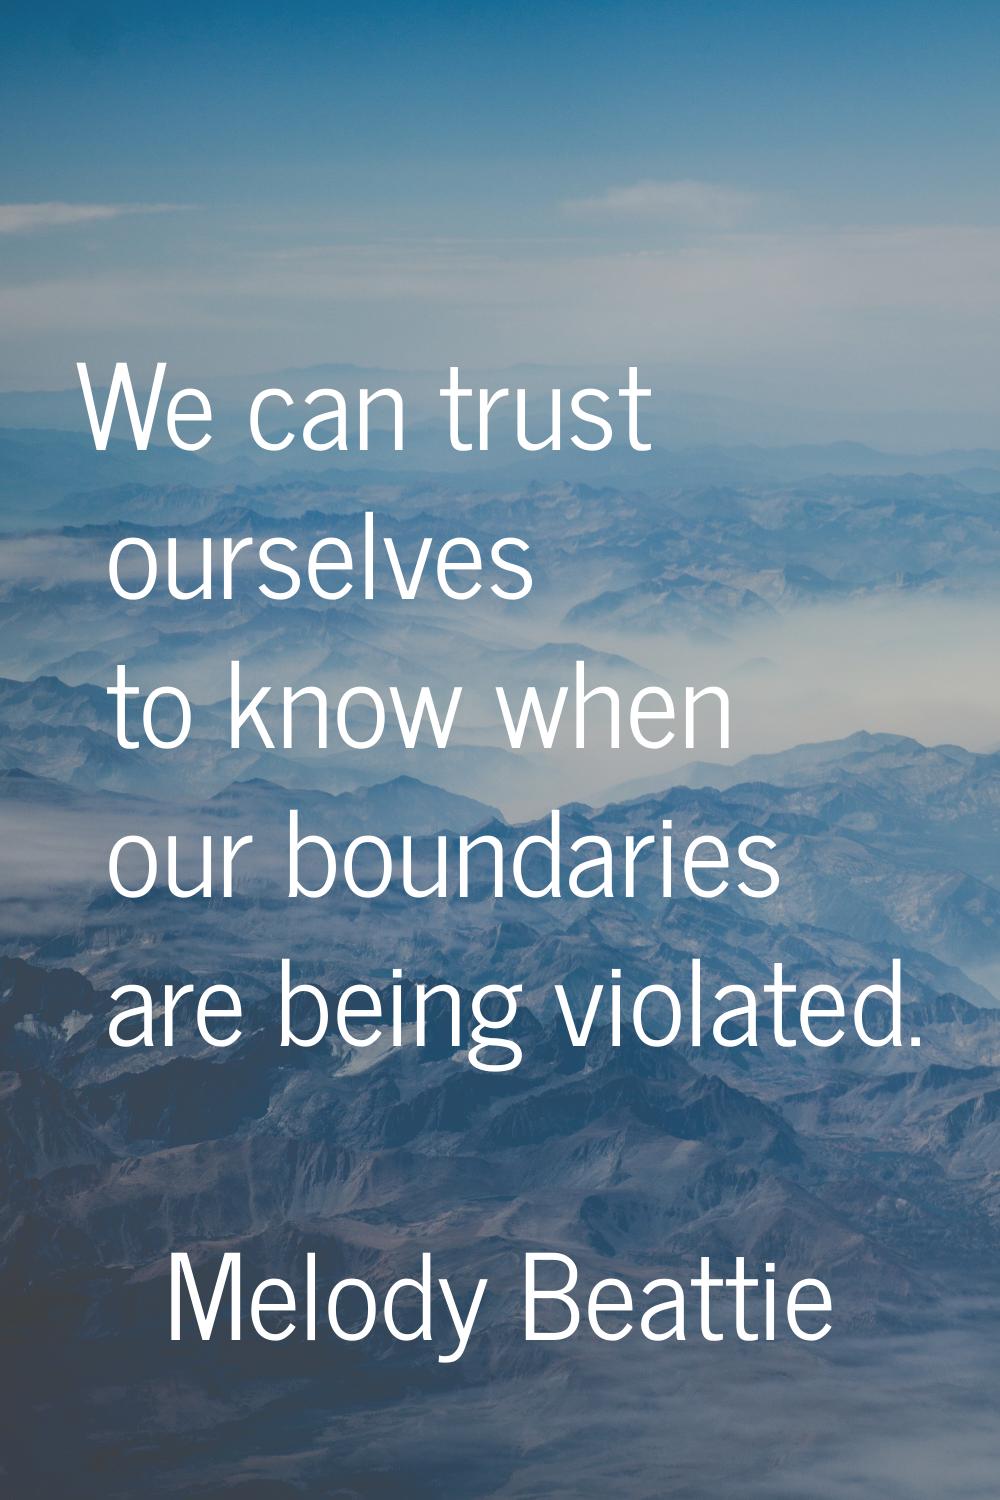 We can trust ourselves to know when our boundaries are being violated.